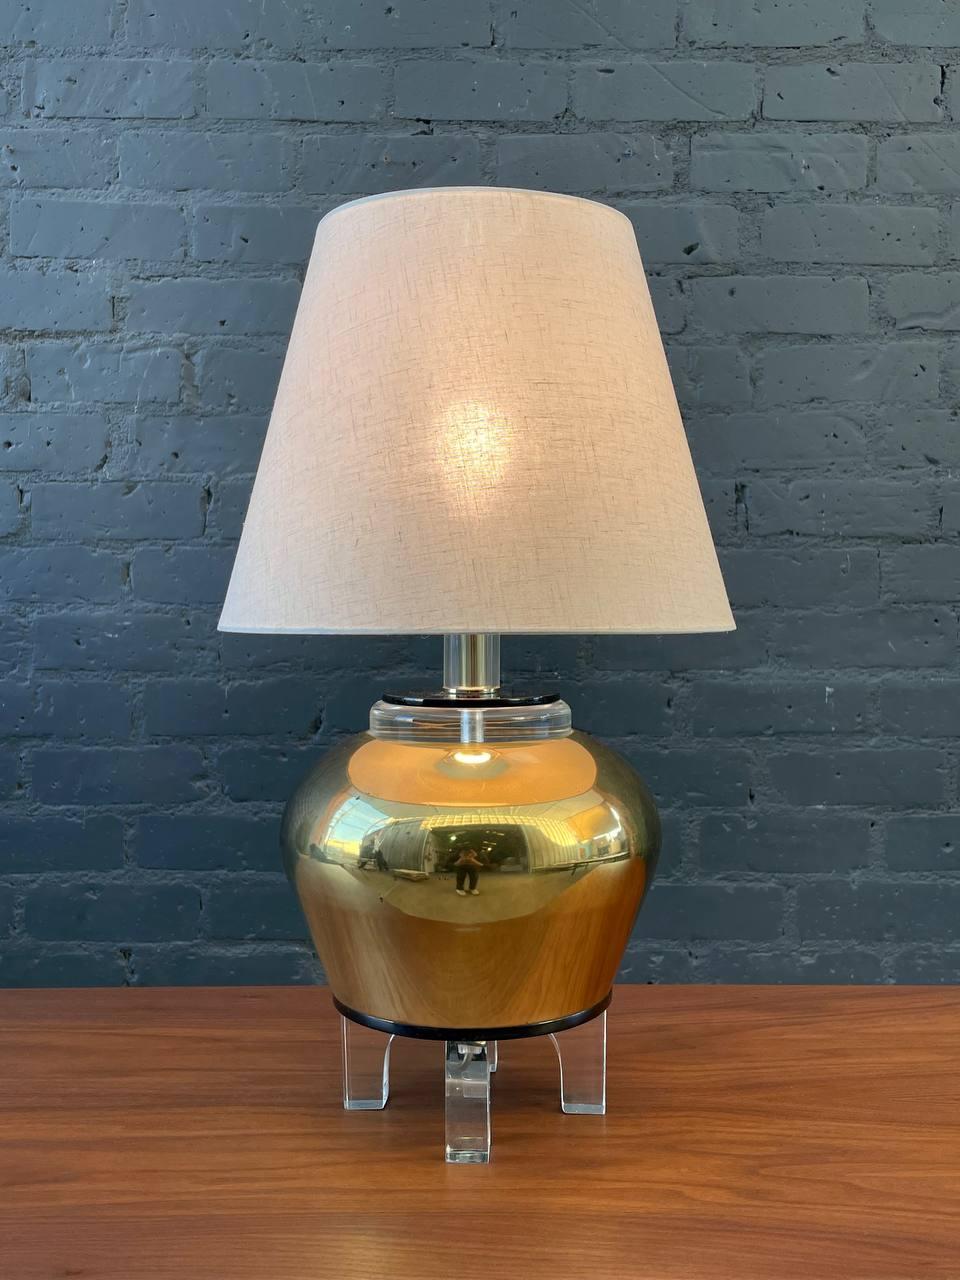 Newly Rewired, New Shade

Dimensions: 
23” H x 9” W x 9” D
Shade:
10.50” H x 8”-13” D

Materials: Patinated Brass, Lucite Base, New Shade 